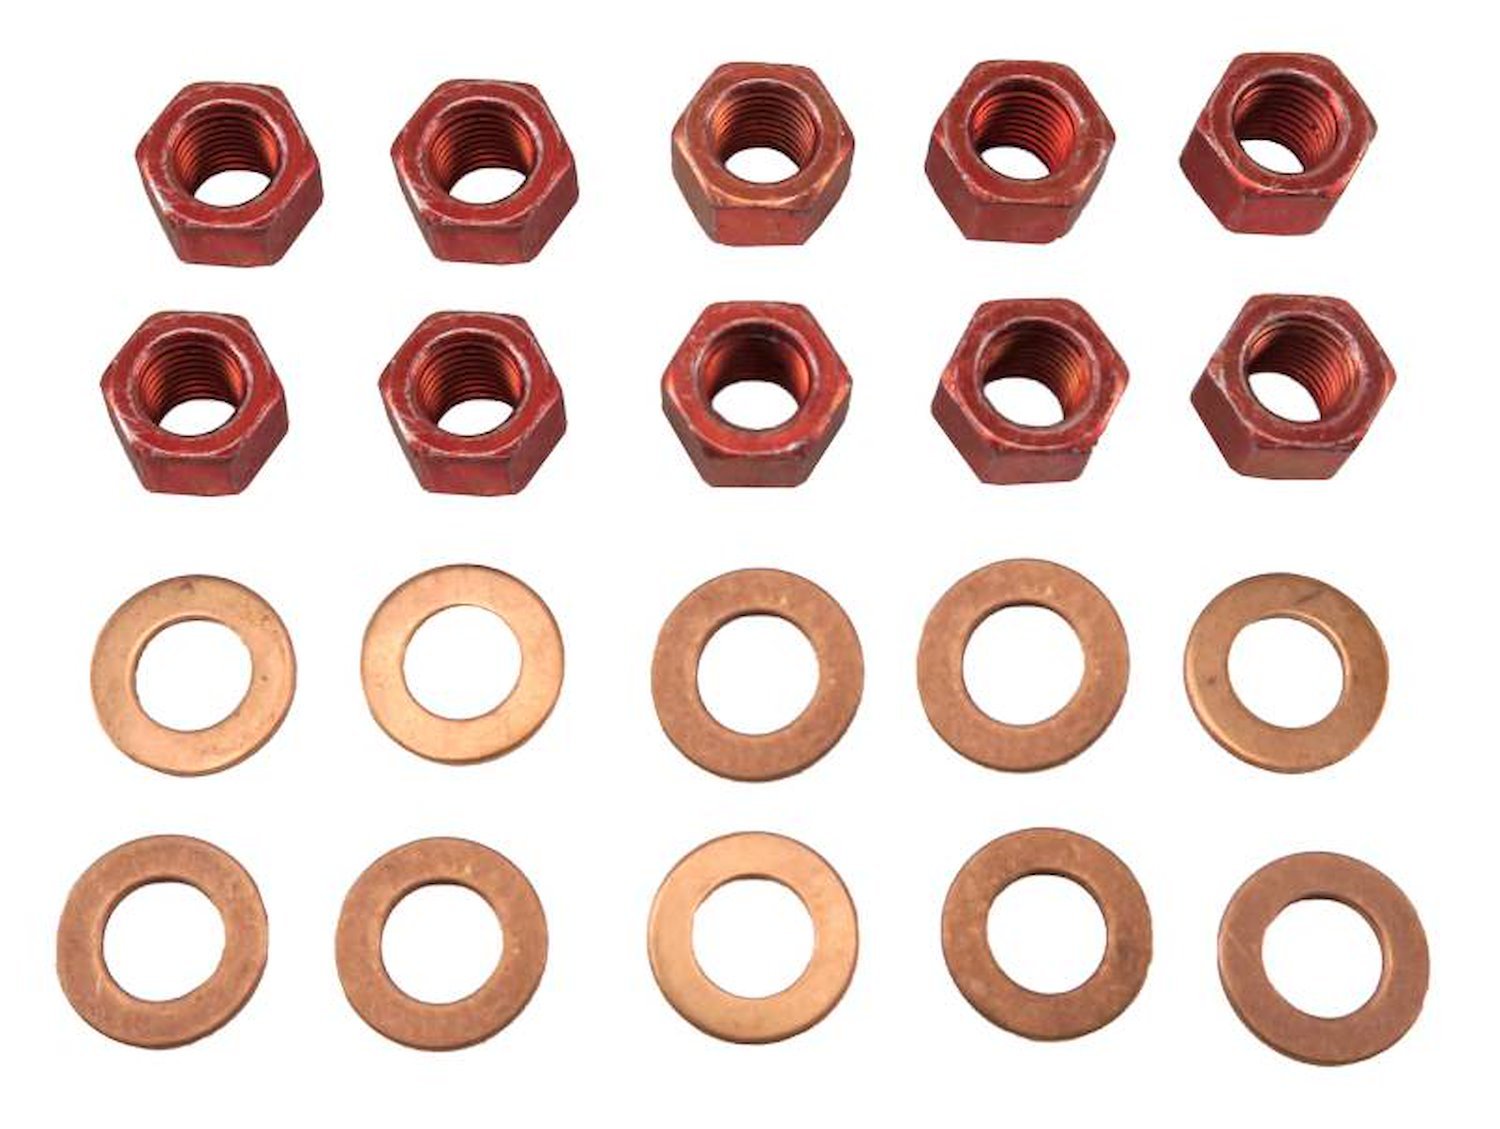 MDK002 1968-1973 Ford Mustang Rear Housing Differential Nuts & Washers